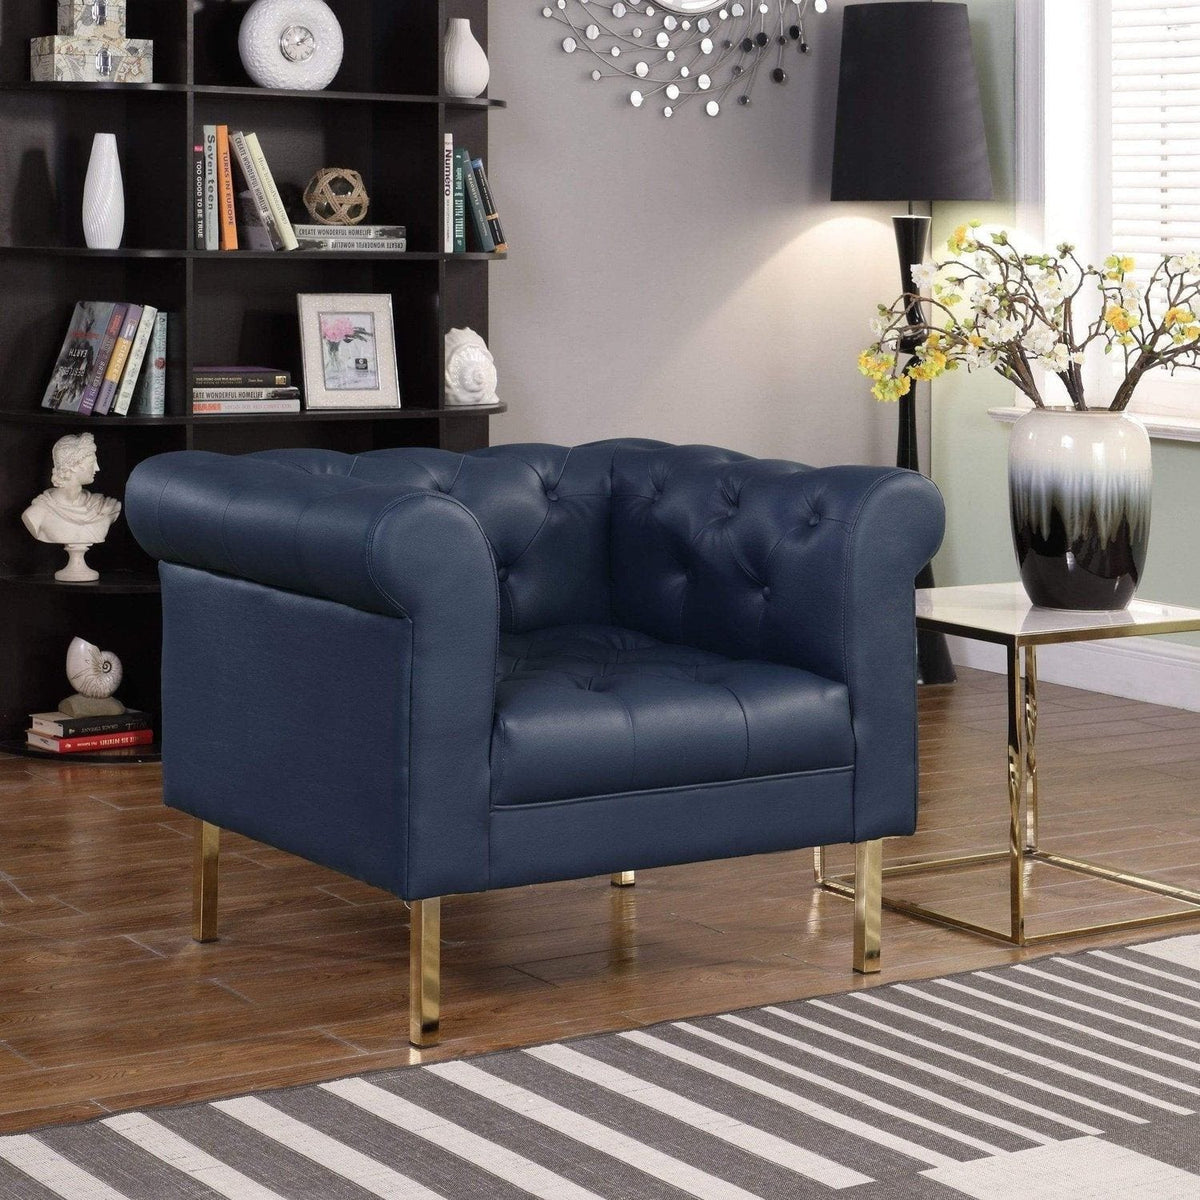 Iconic Home Giovanni Tufted PU Leather Club Chair Navy